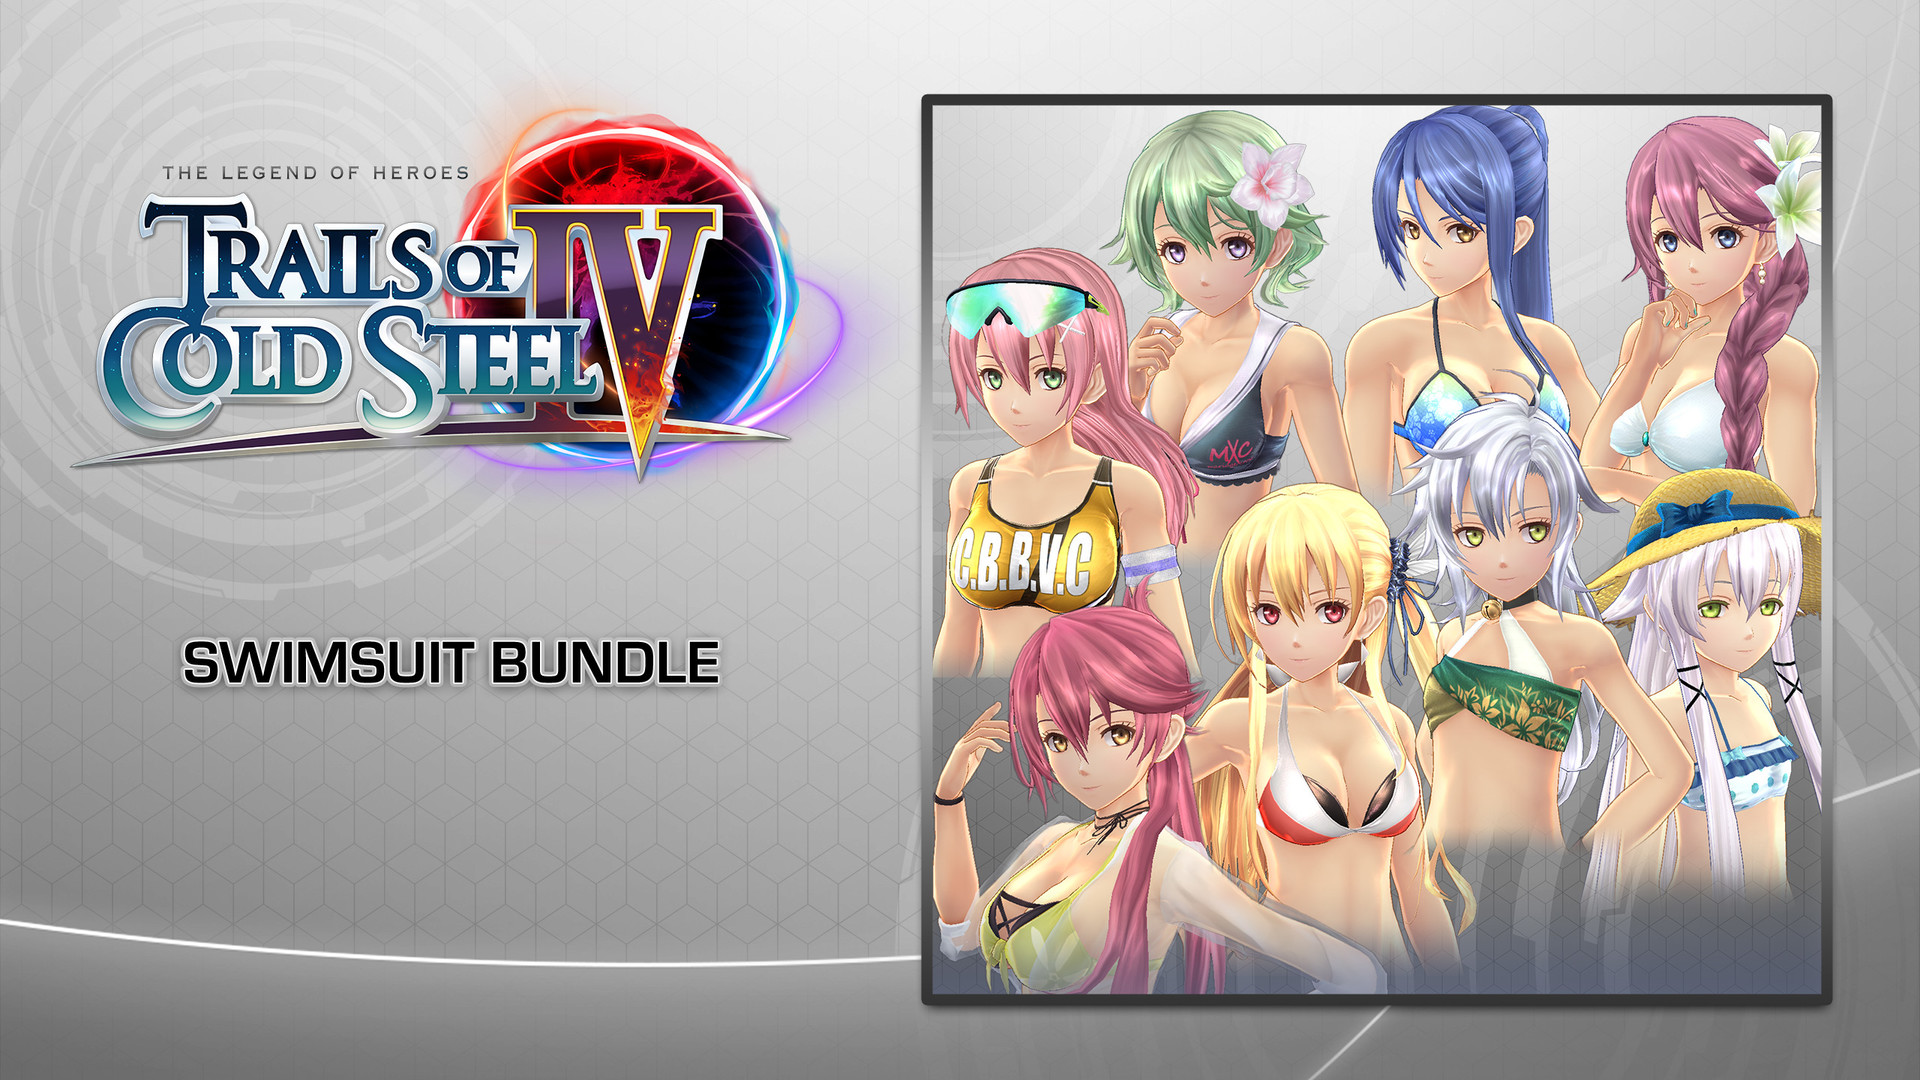 The Legend of Heroes: Trails of Cold Steel IV - Swimsuit Bundle Featured Screenshot #1